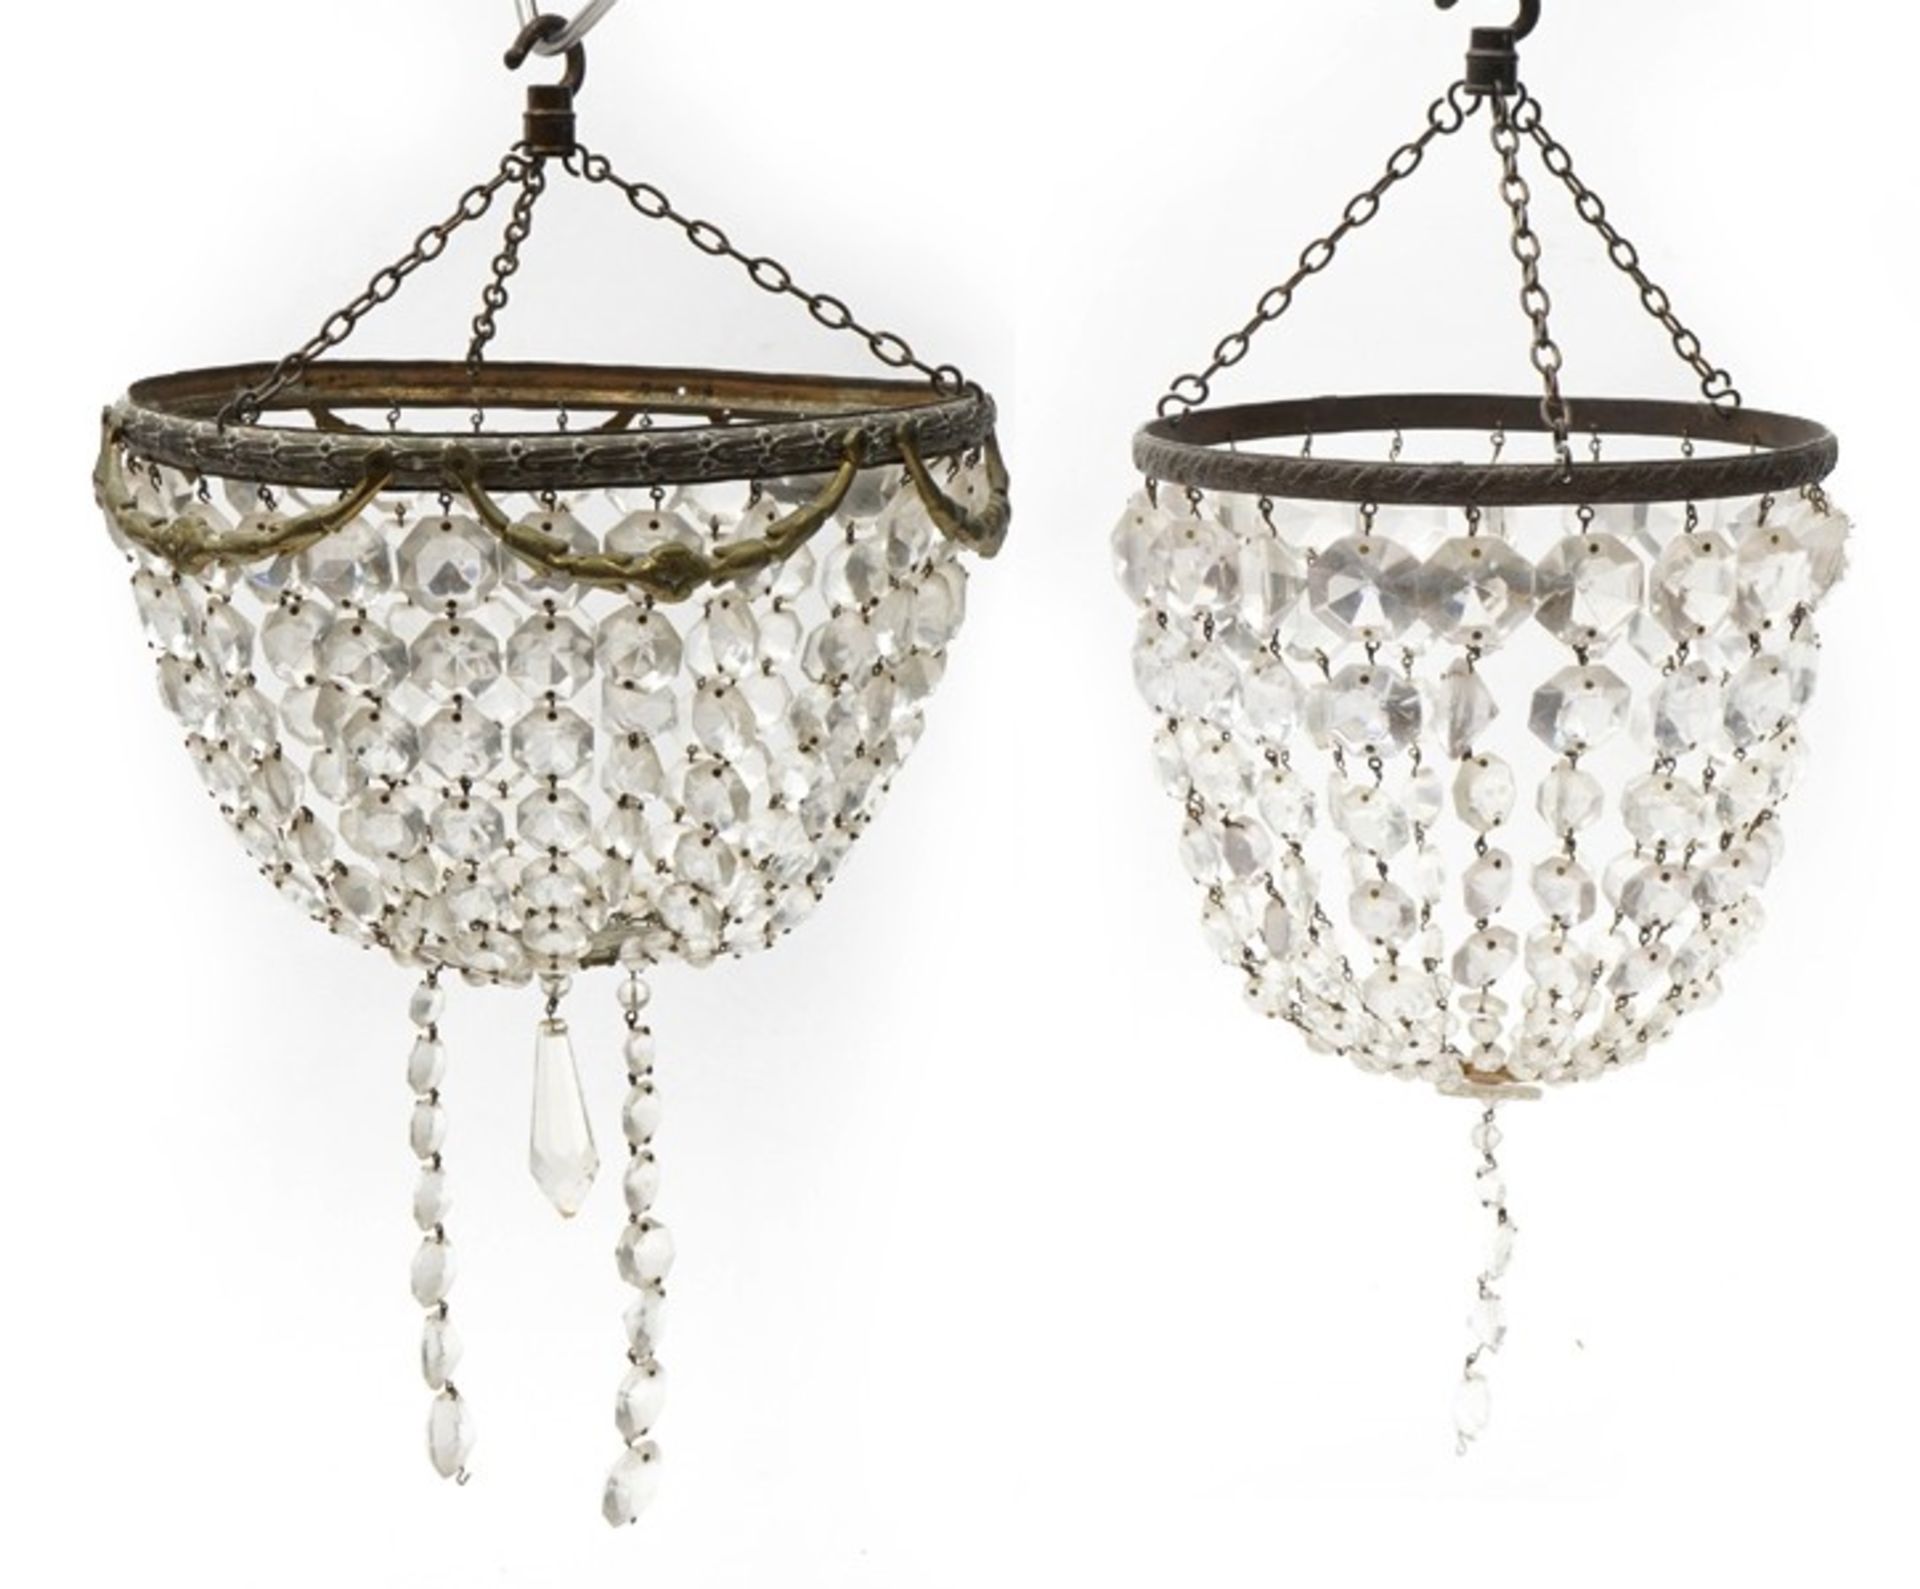 Two brass bag chandeliers with cut glass drops, the largest 26cm in diameter : For further